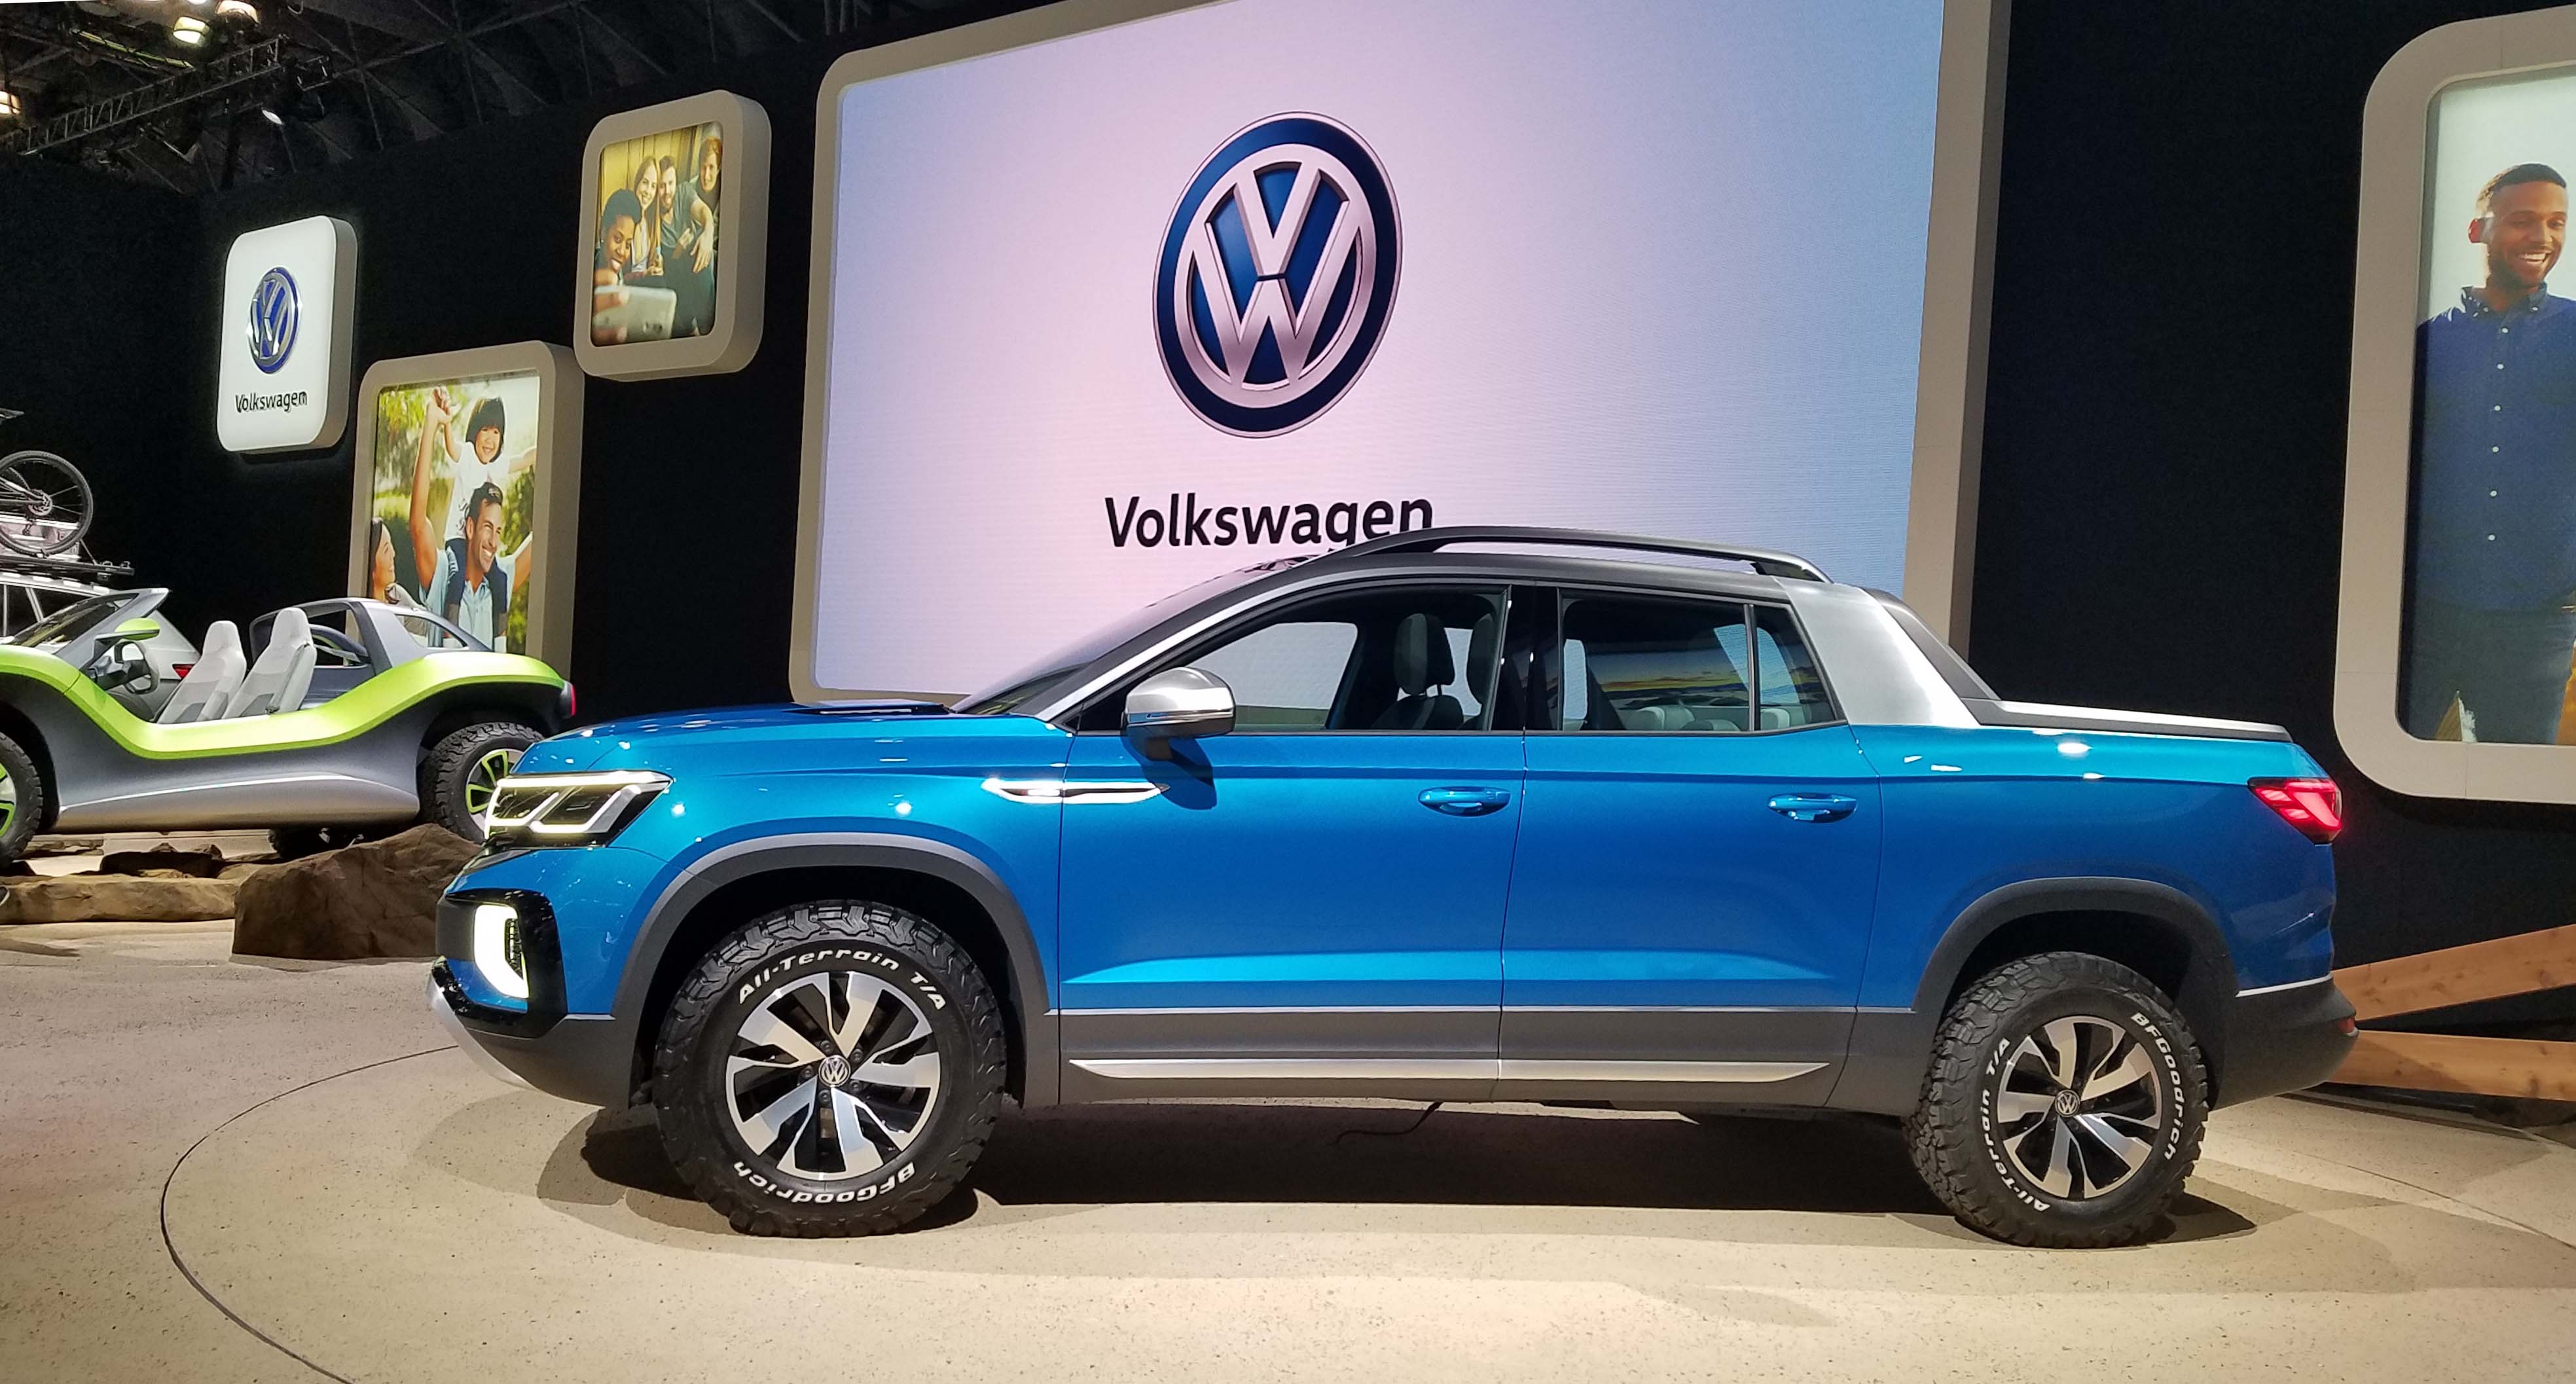 The 2019 compact VW Tarok pickup truck concept is currently configured for the South American market with an economical, 147-horse, 1.4-liter engine. If it was brought to the U.S., VW says that would likely be bumped up to a more capable engine found in the U.S. Golf and Jetta models.